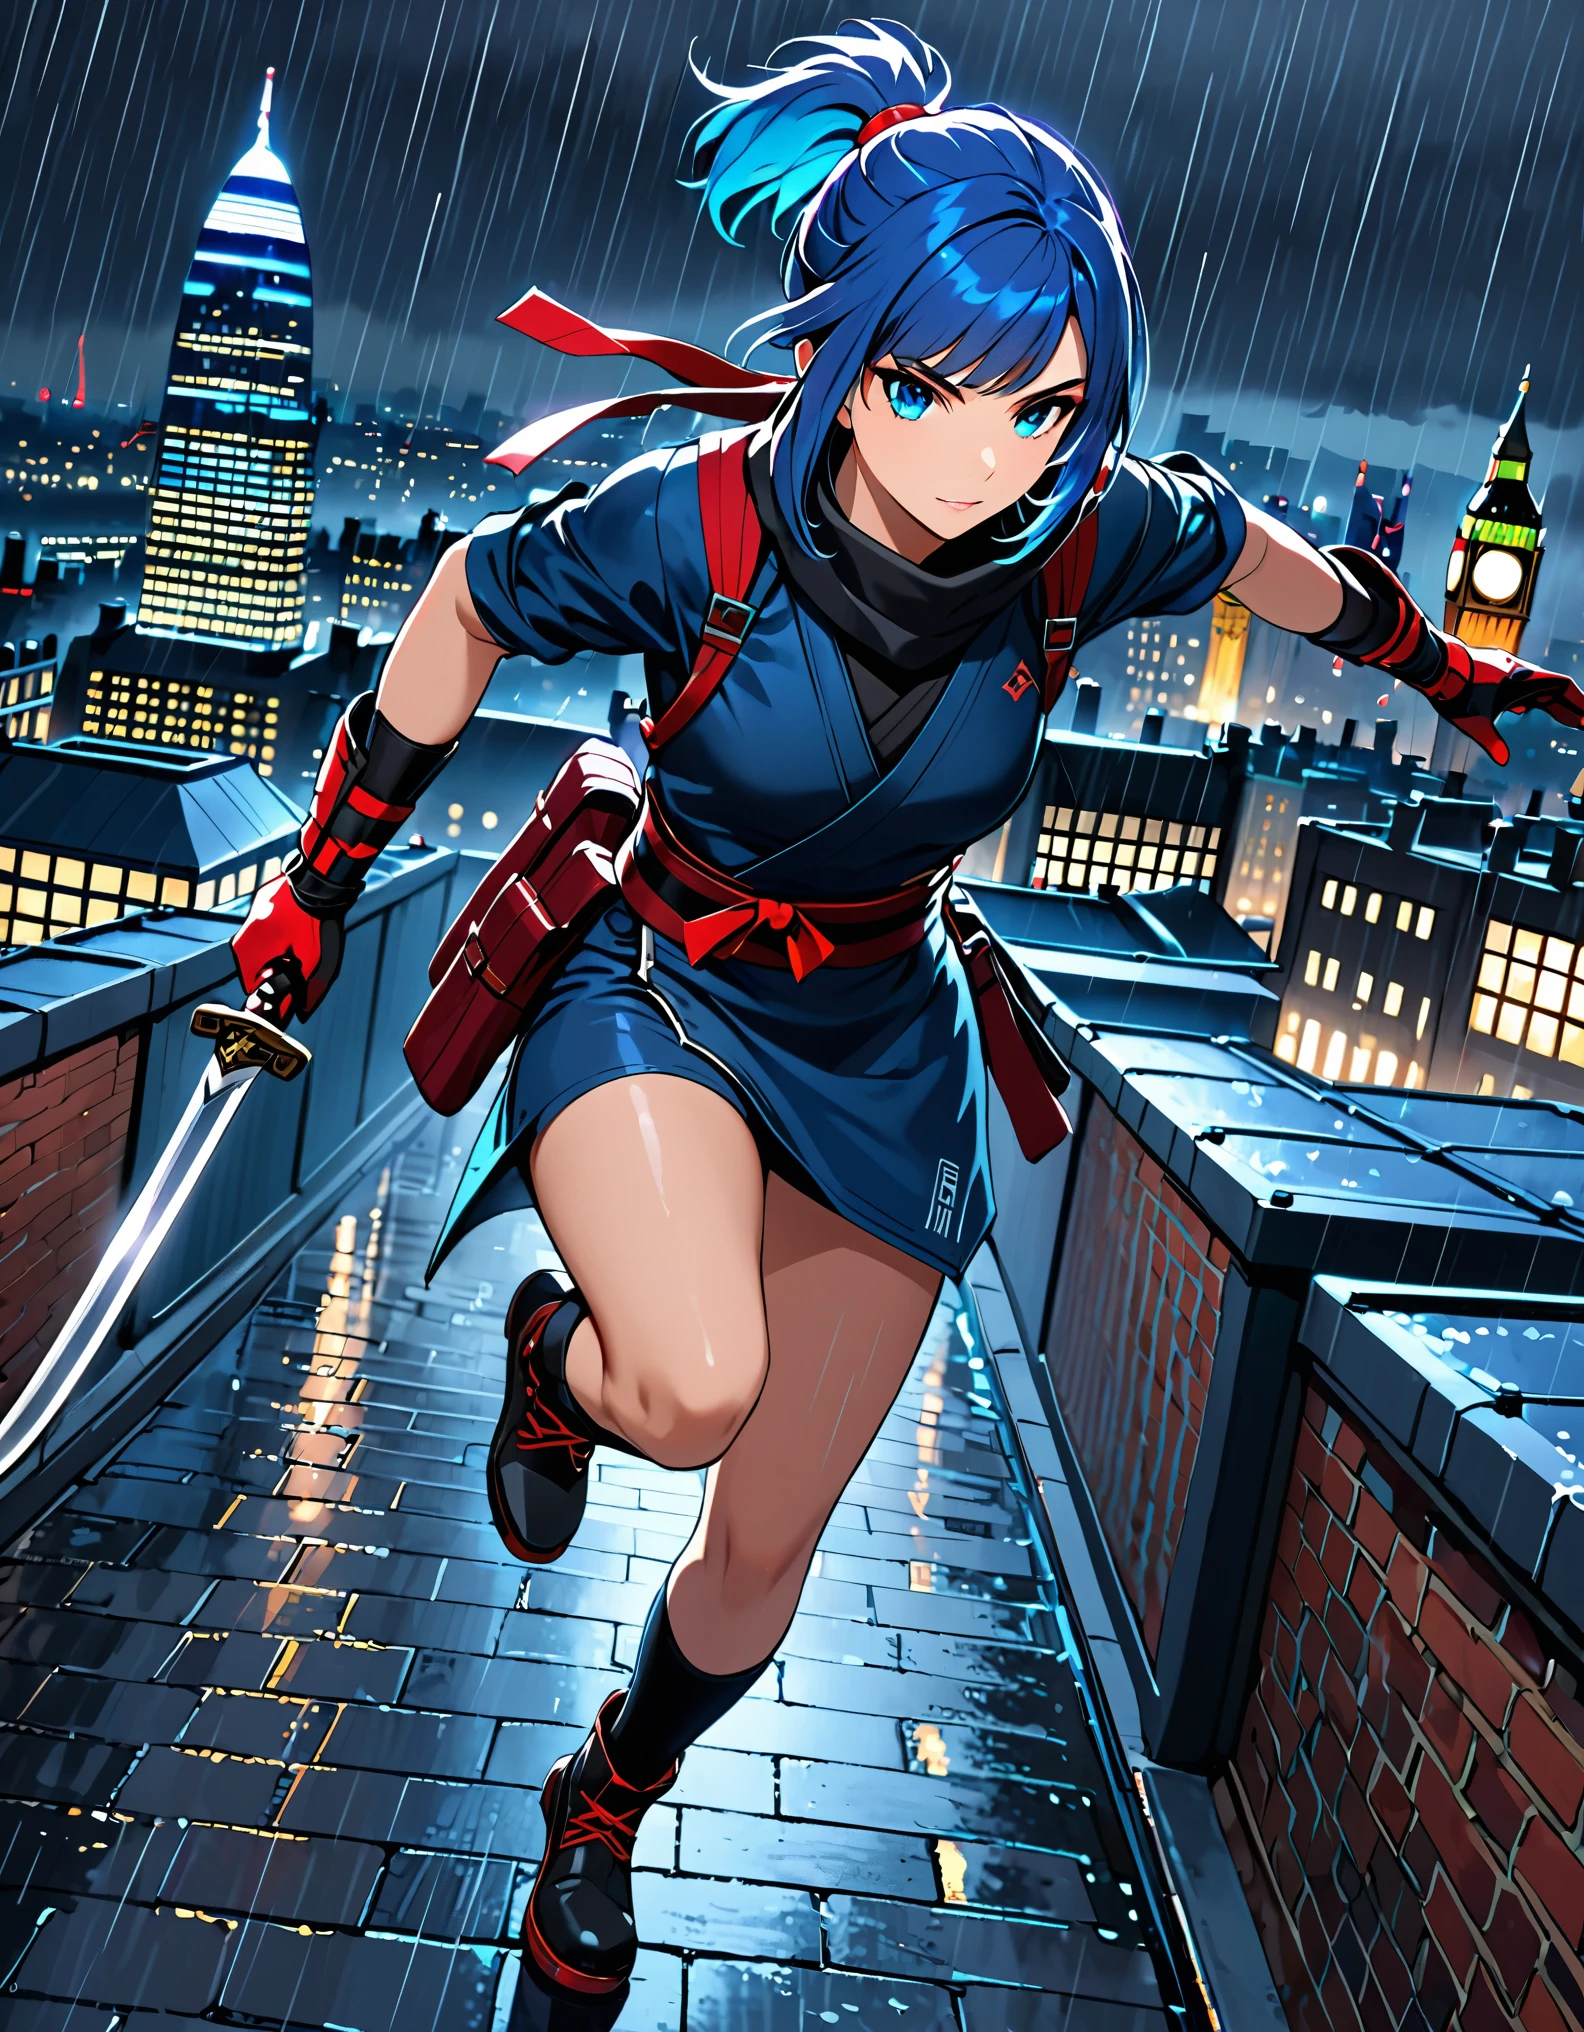 masterpiece, best quality, semi-realistic, solo, solo focus 1girl, blue hair, short hair, ponytail hair, cyan eyes, beautiful detailed eyes, beautiful detailed face, stoic, professional, ninja, red tactical gloves, bare legs, matching boots, using daggers, london cityscape, rooftop, dutch angle, night, rain, running to viewer, noir atmosphere.